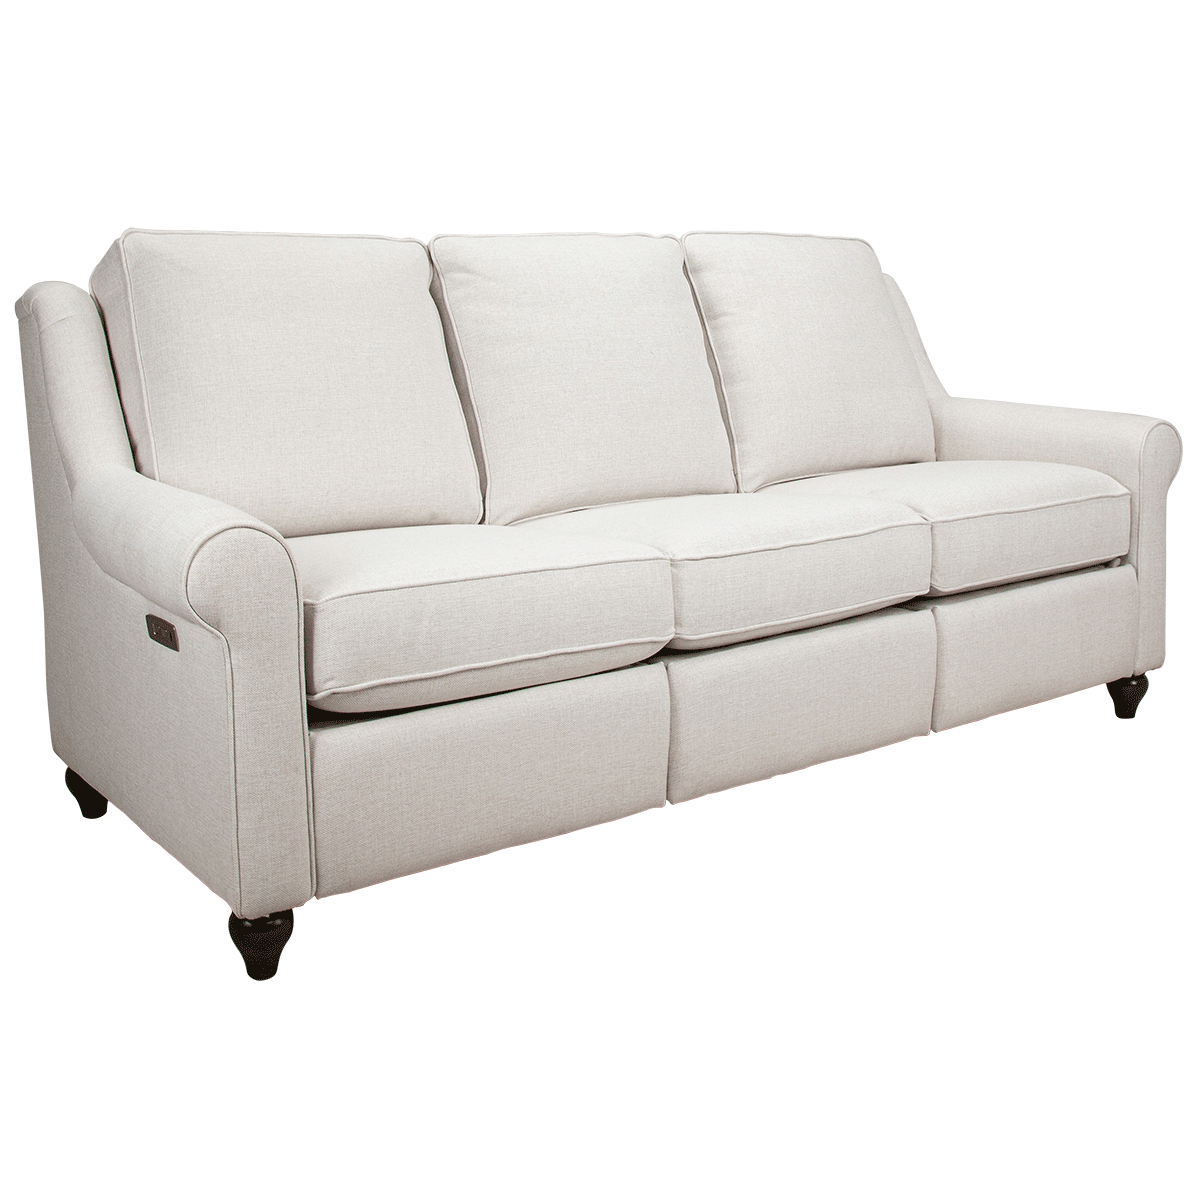 Sofas Magnificent Motion Tall Sofa